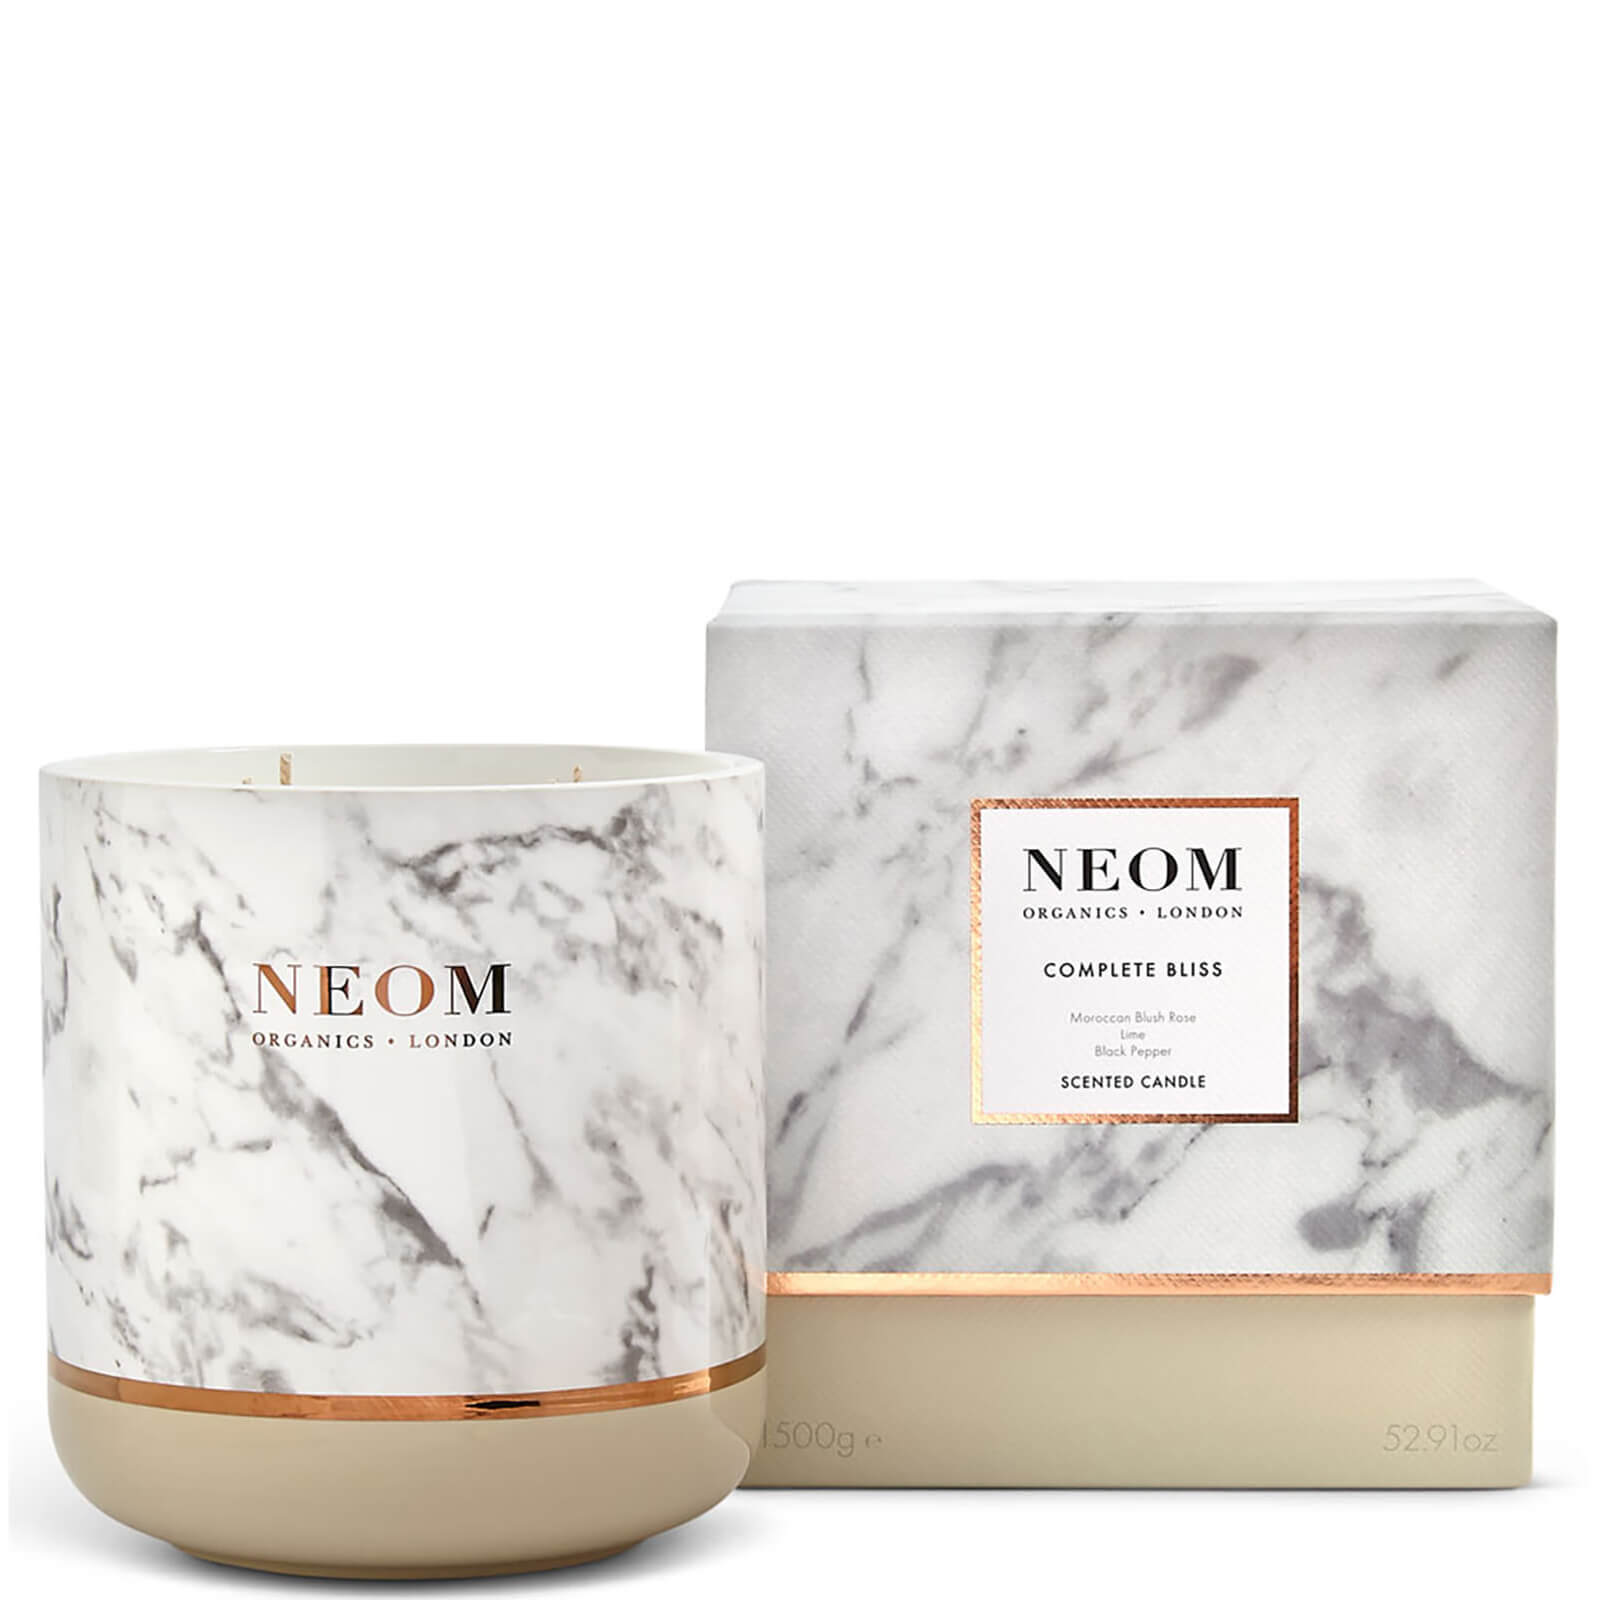 NEOM Complete Bliss Ultimate Candle 4 Wick